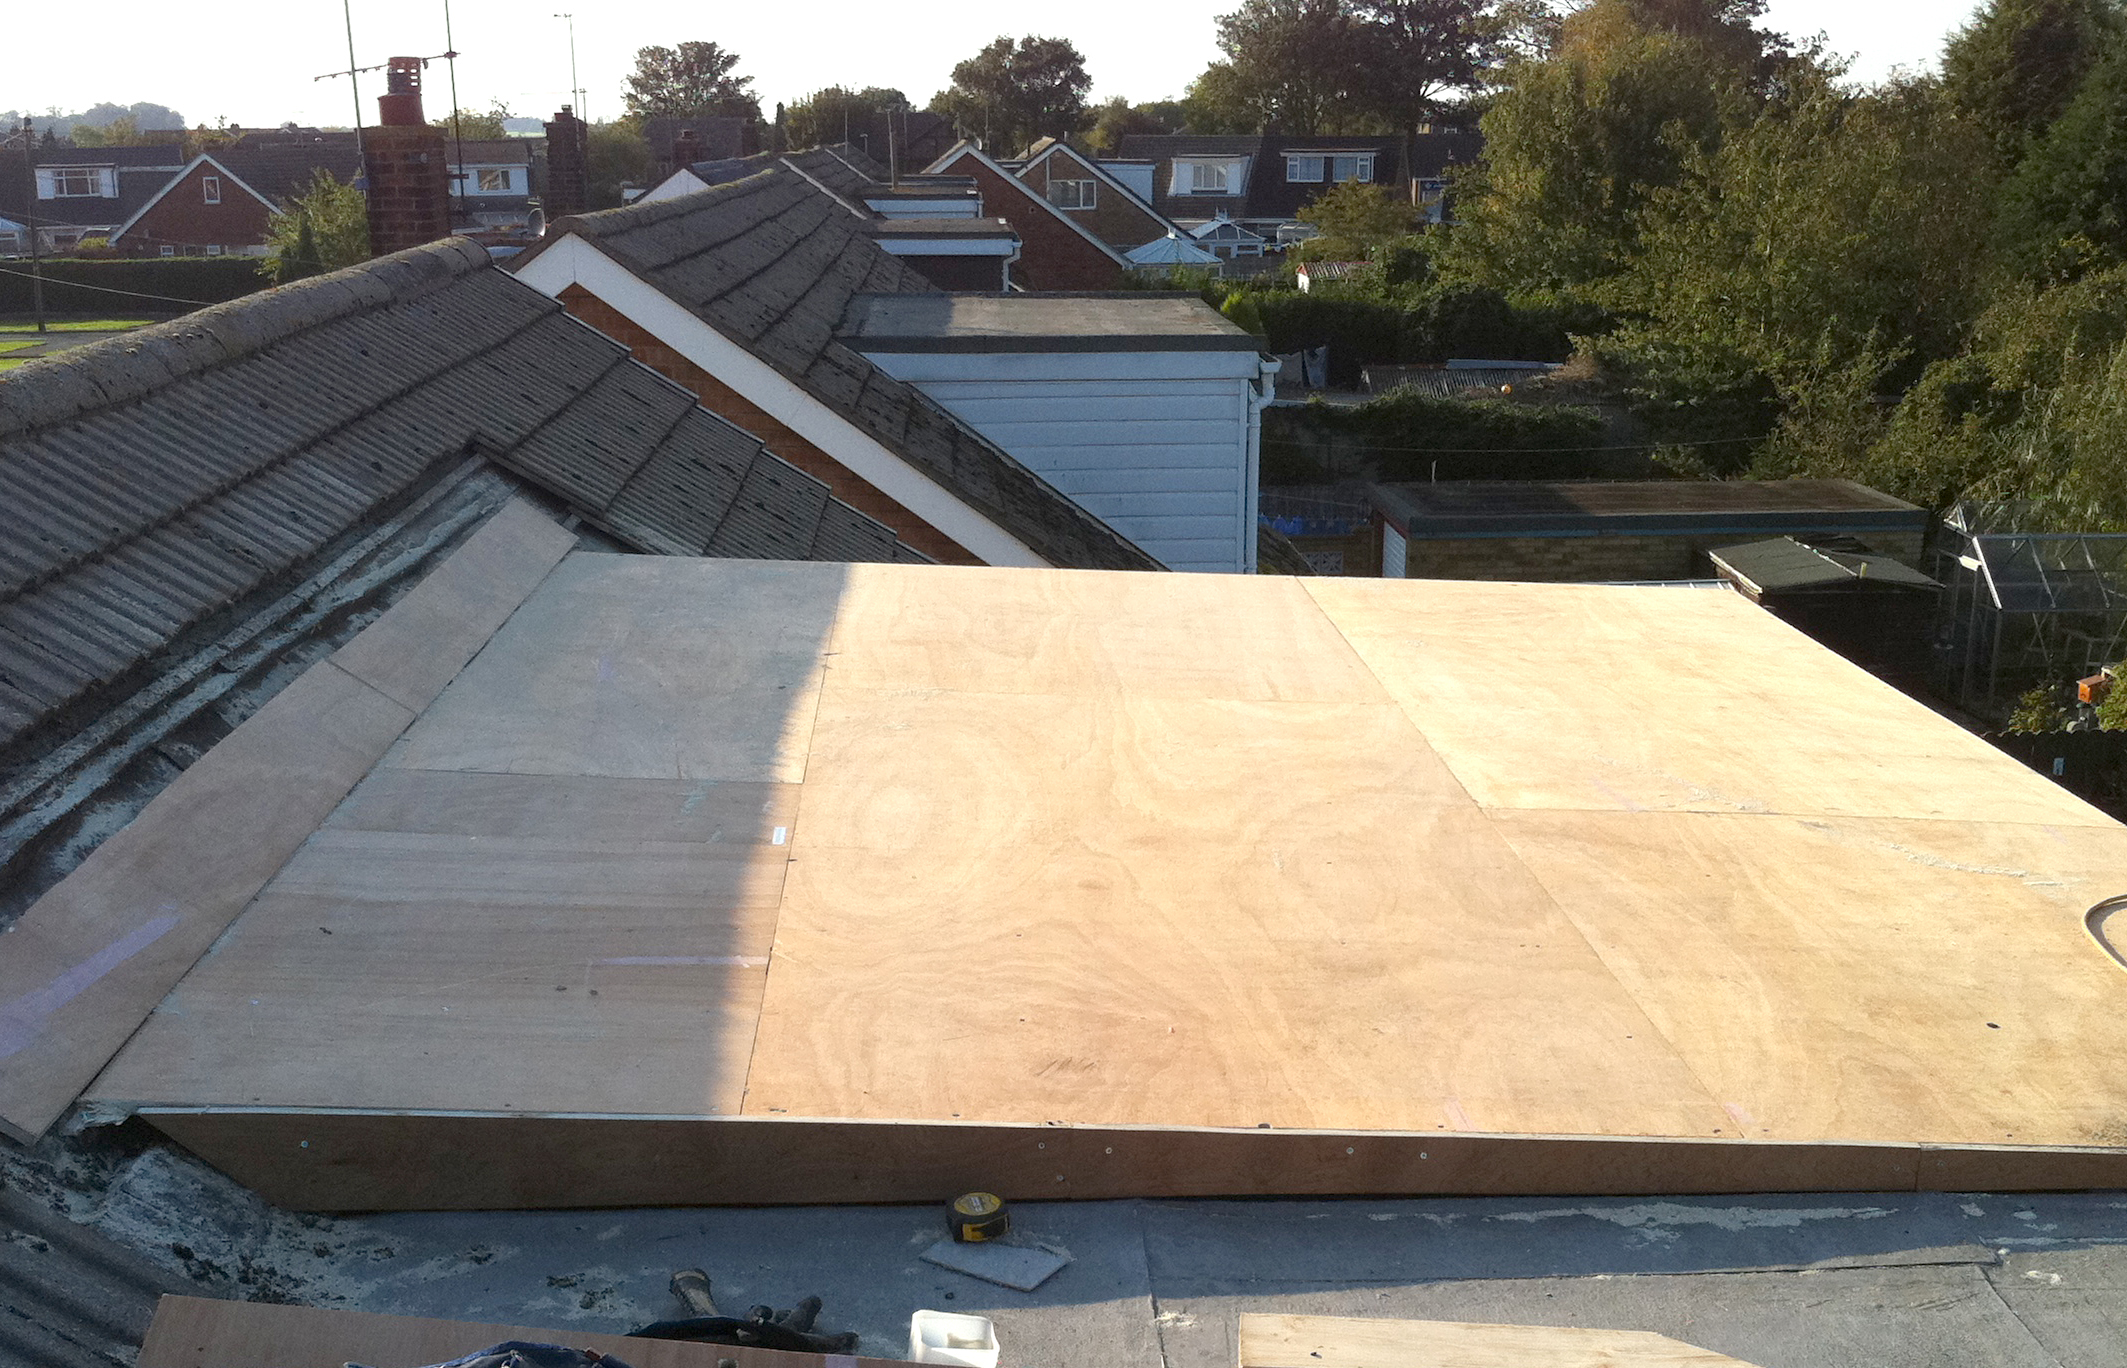 Flat Roofs West Design and Build © All Rights Reserved05.JPG